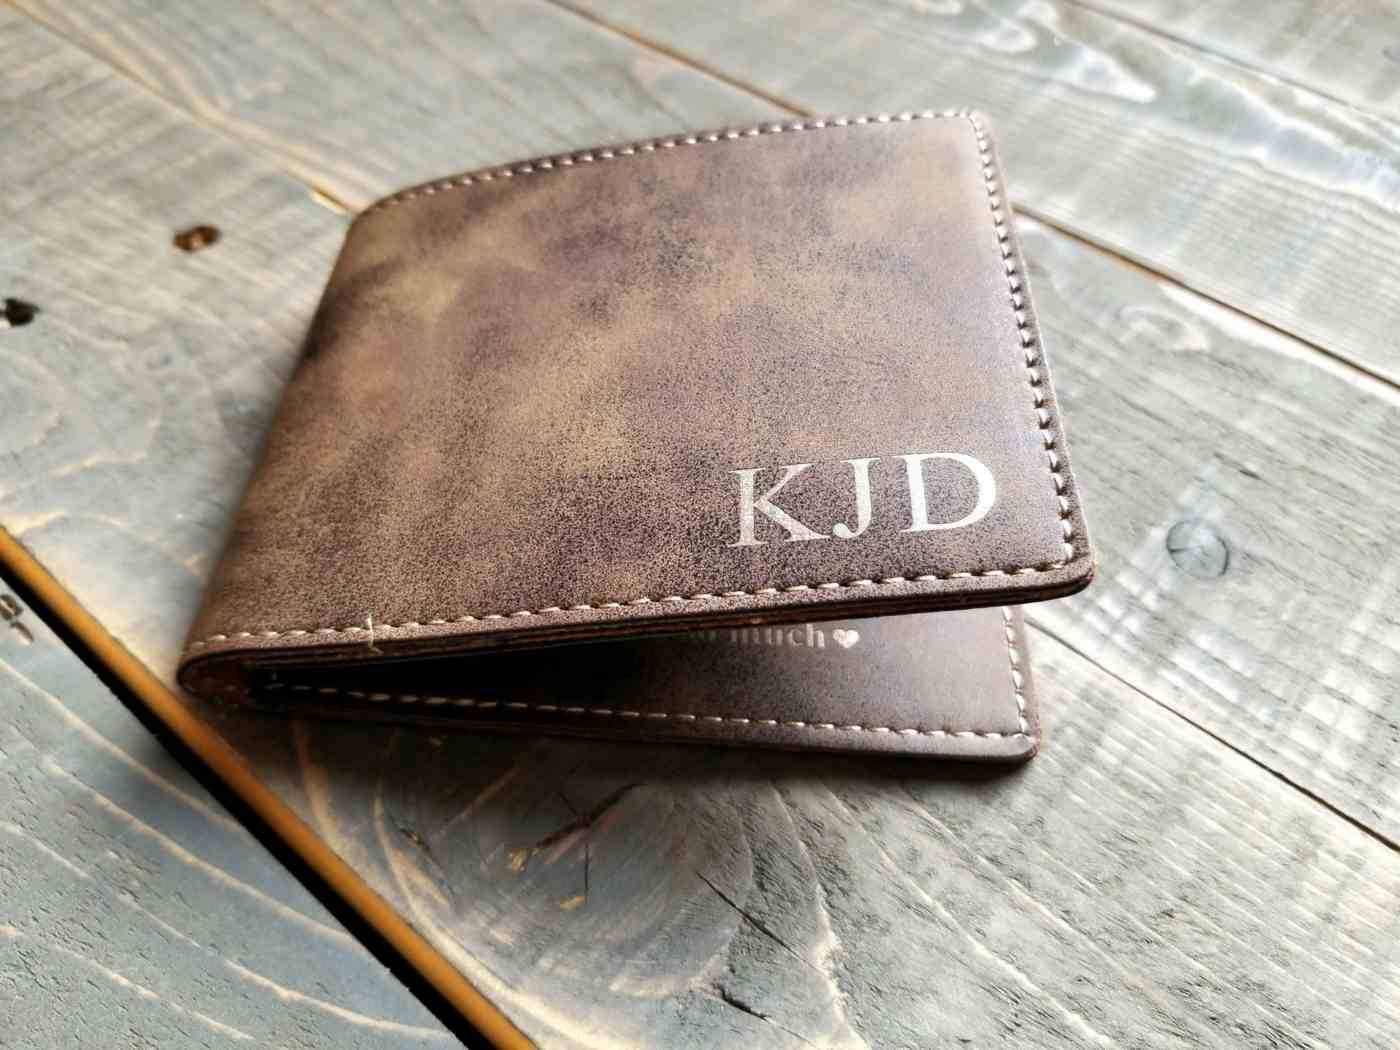 Wallet made of plain leather with water and cloth soaps